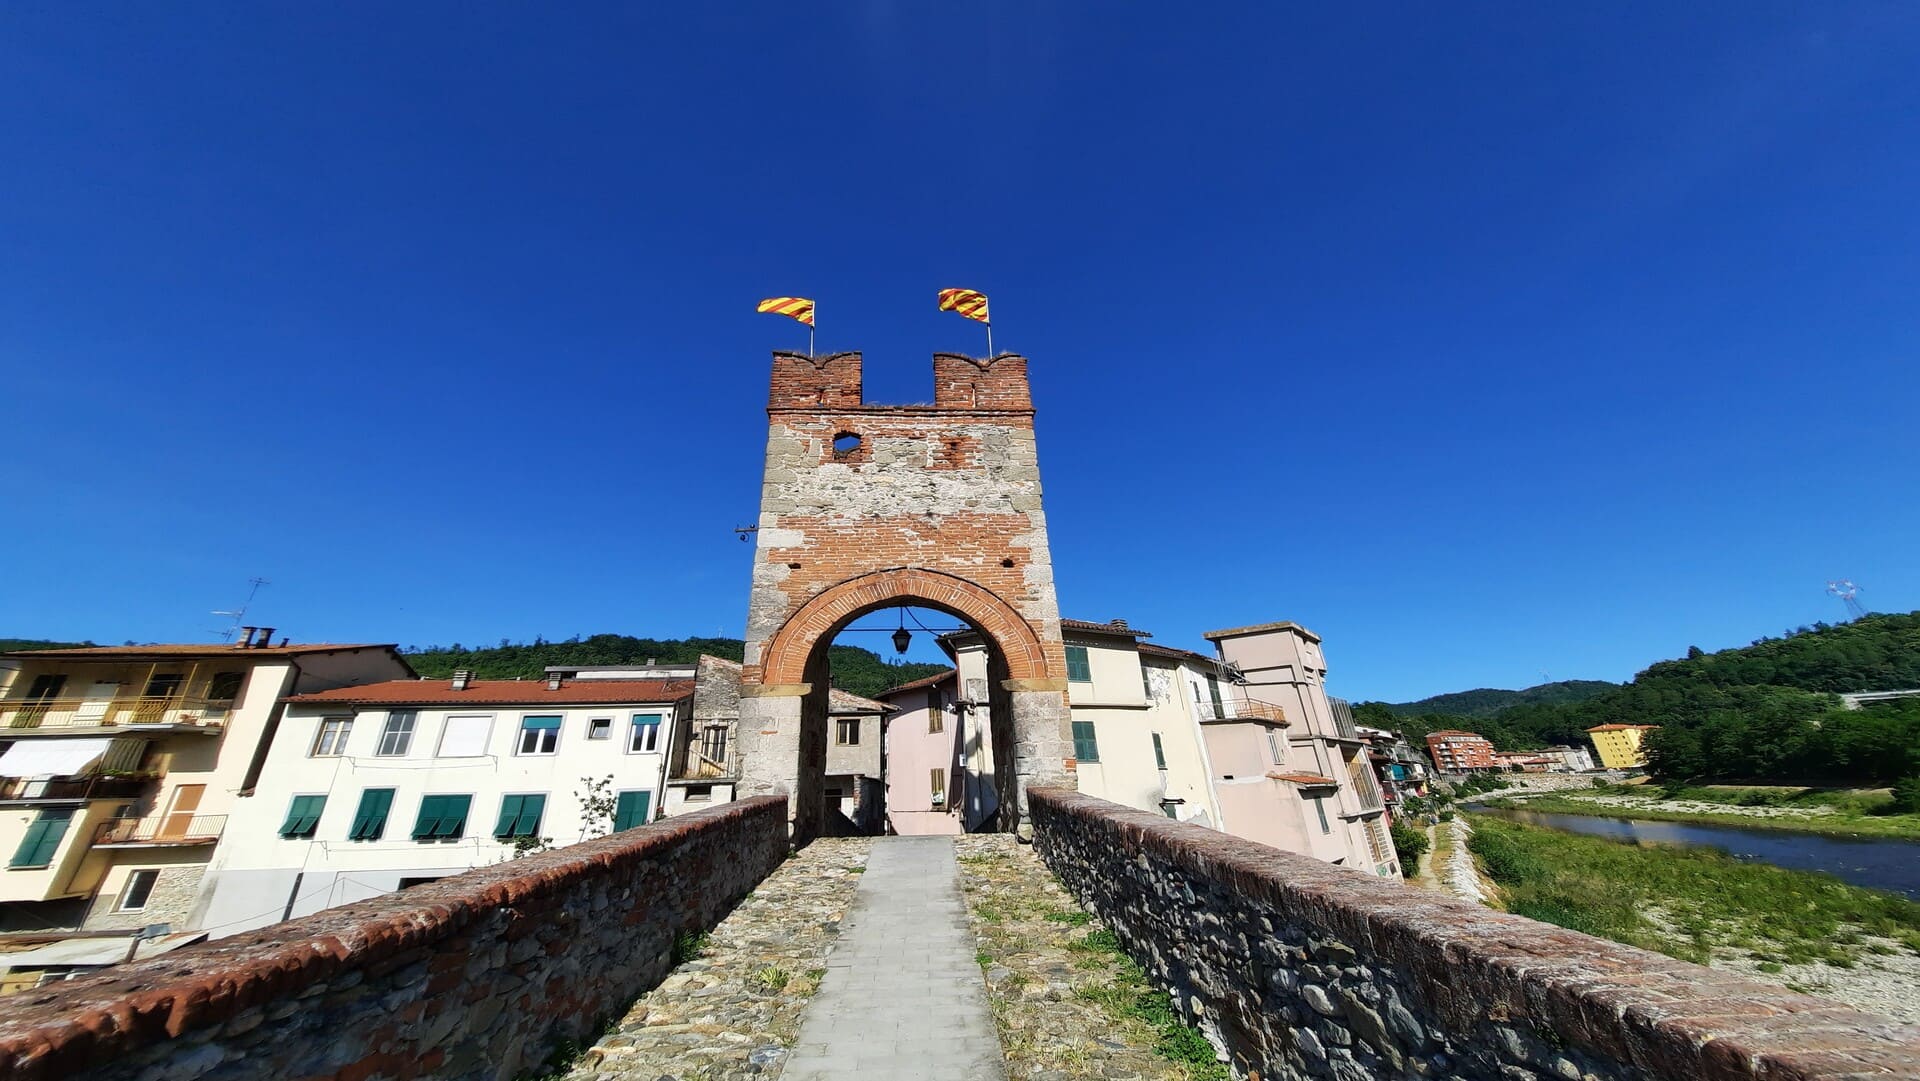 What to see in Millesimo: discovering the village